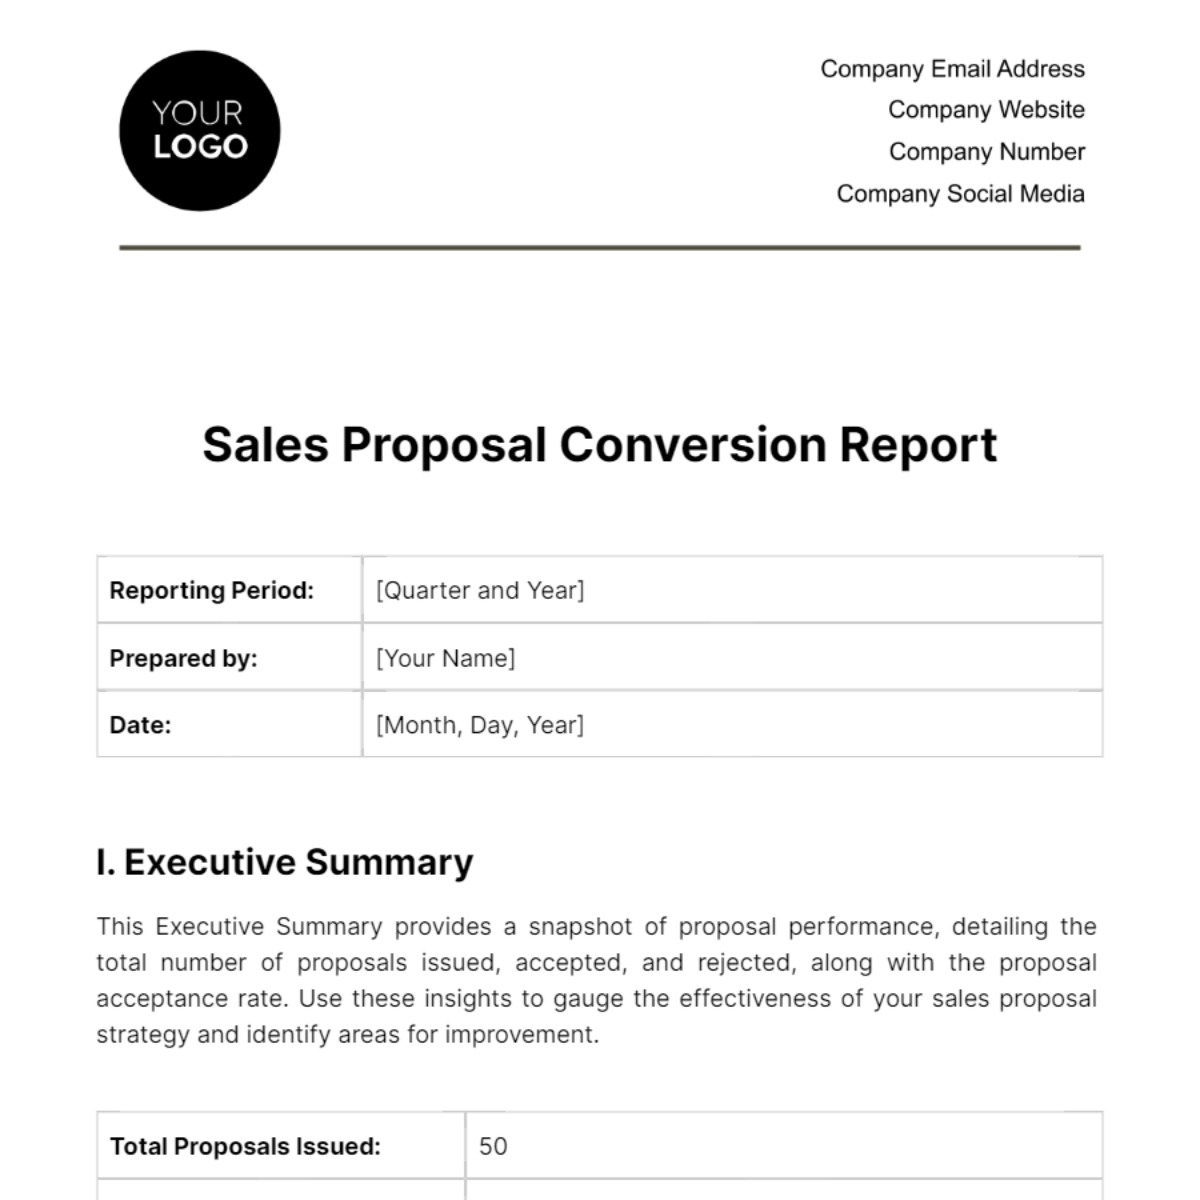 Free Sales Proposal Conversion Report Template